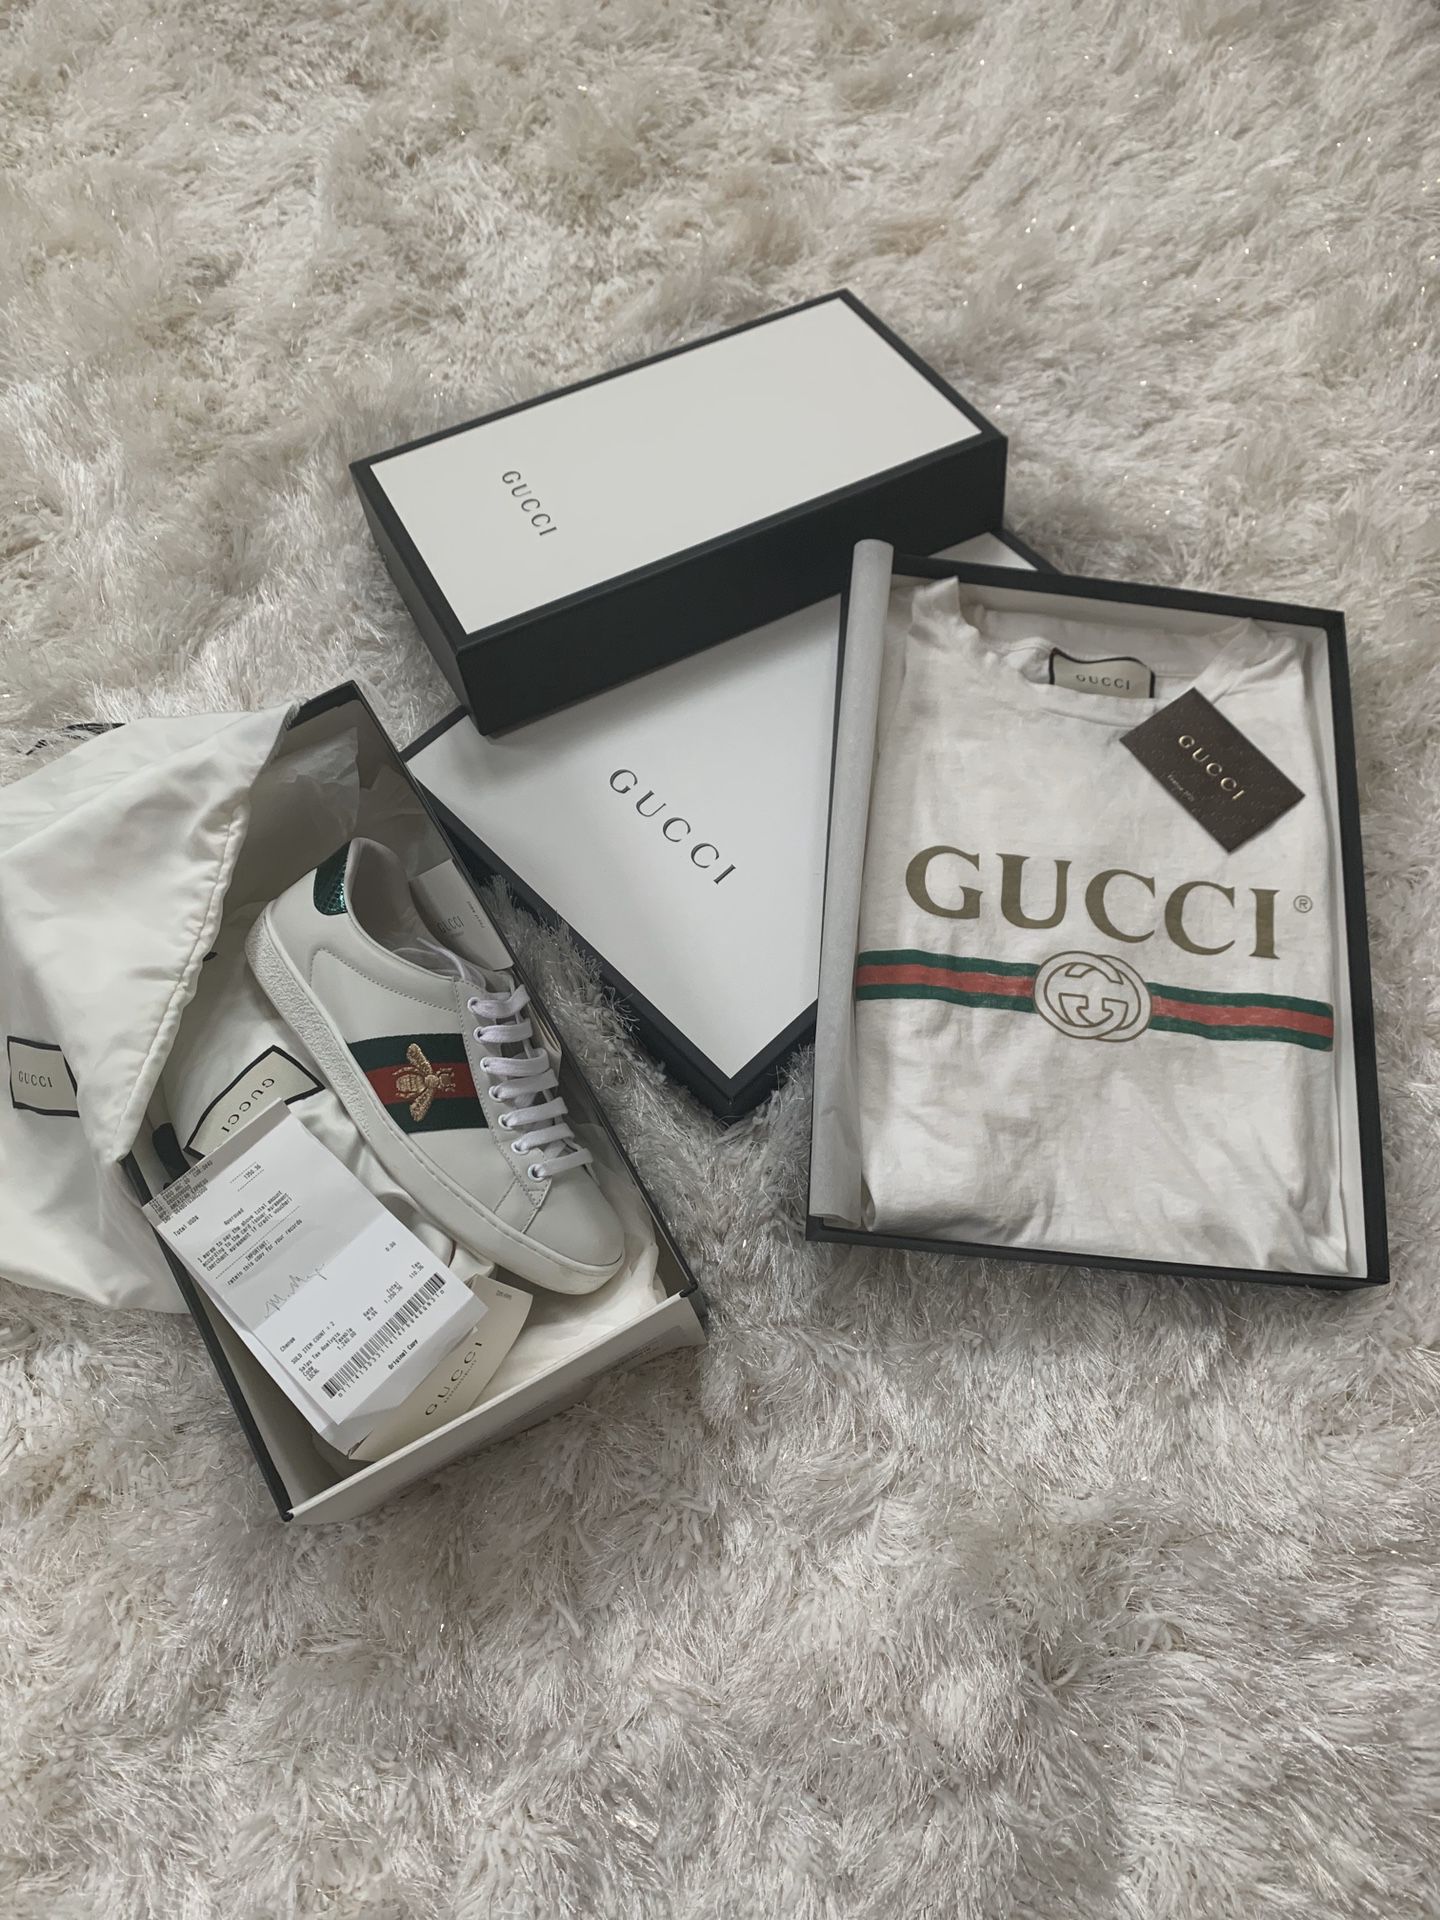 Gucci Shoes and Shirt